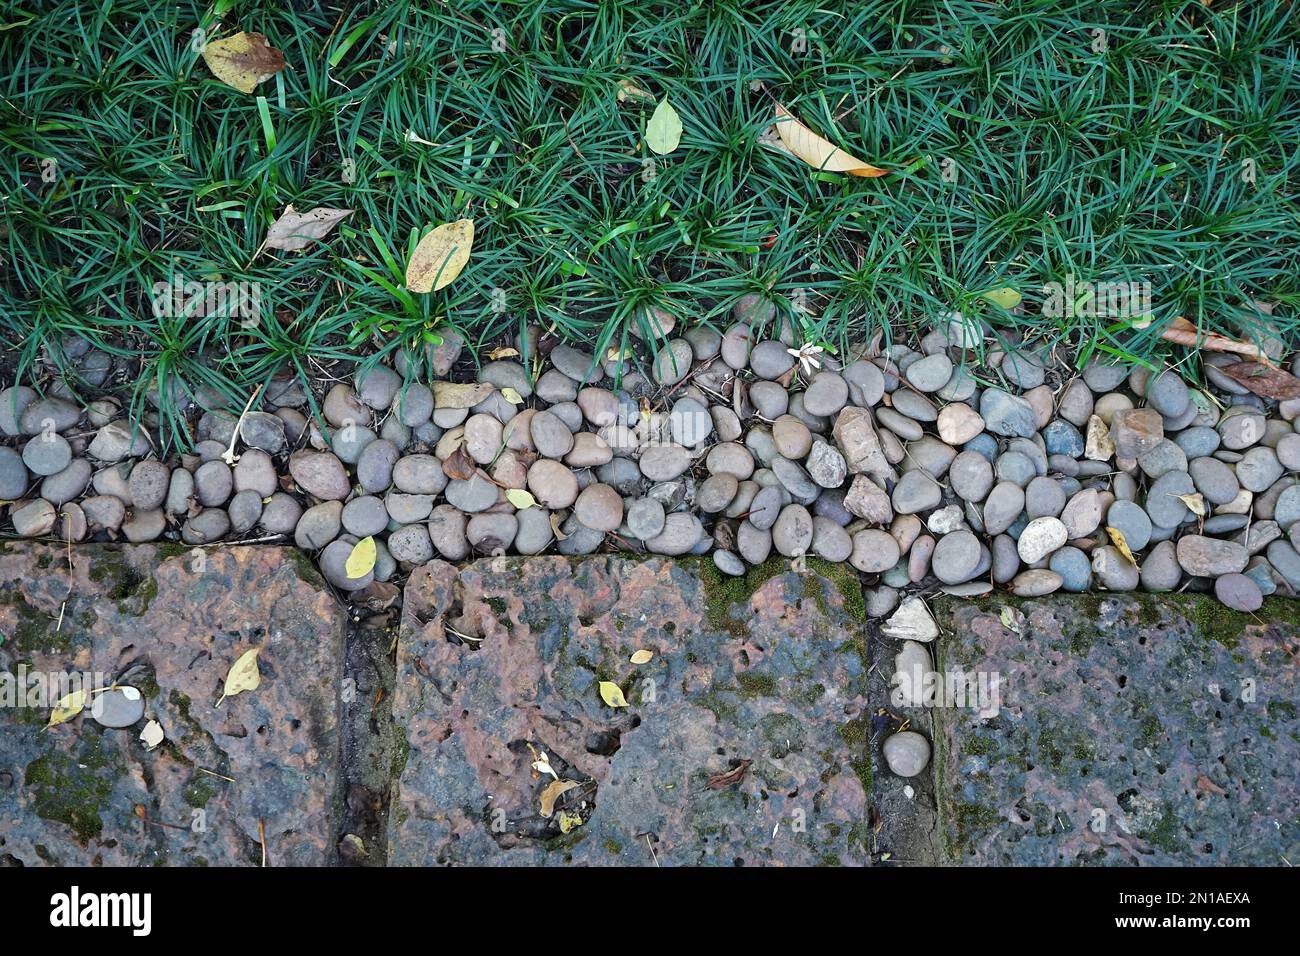 Arrangement of green grass with natural paving stone and clay tiles Stock Photo